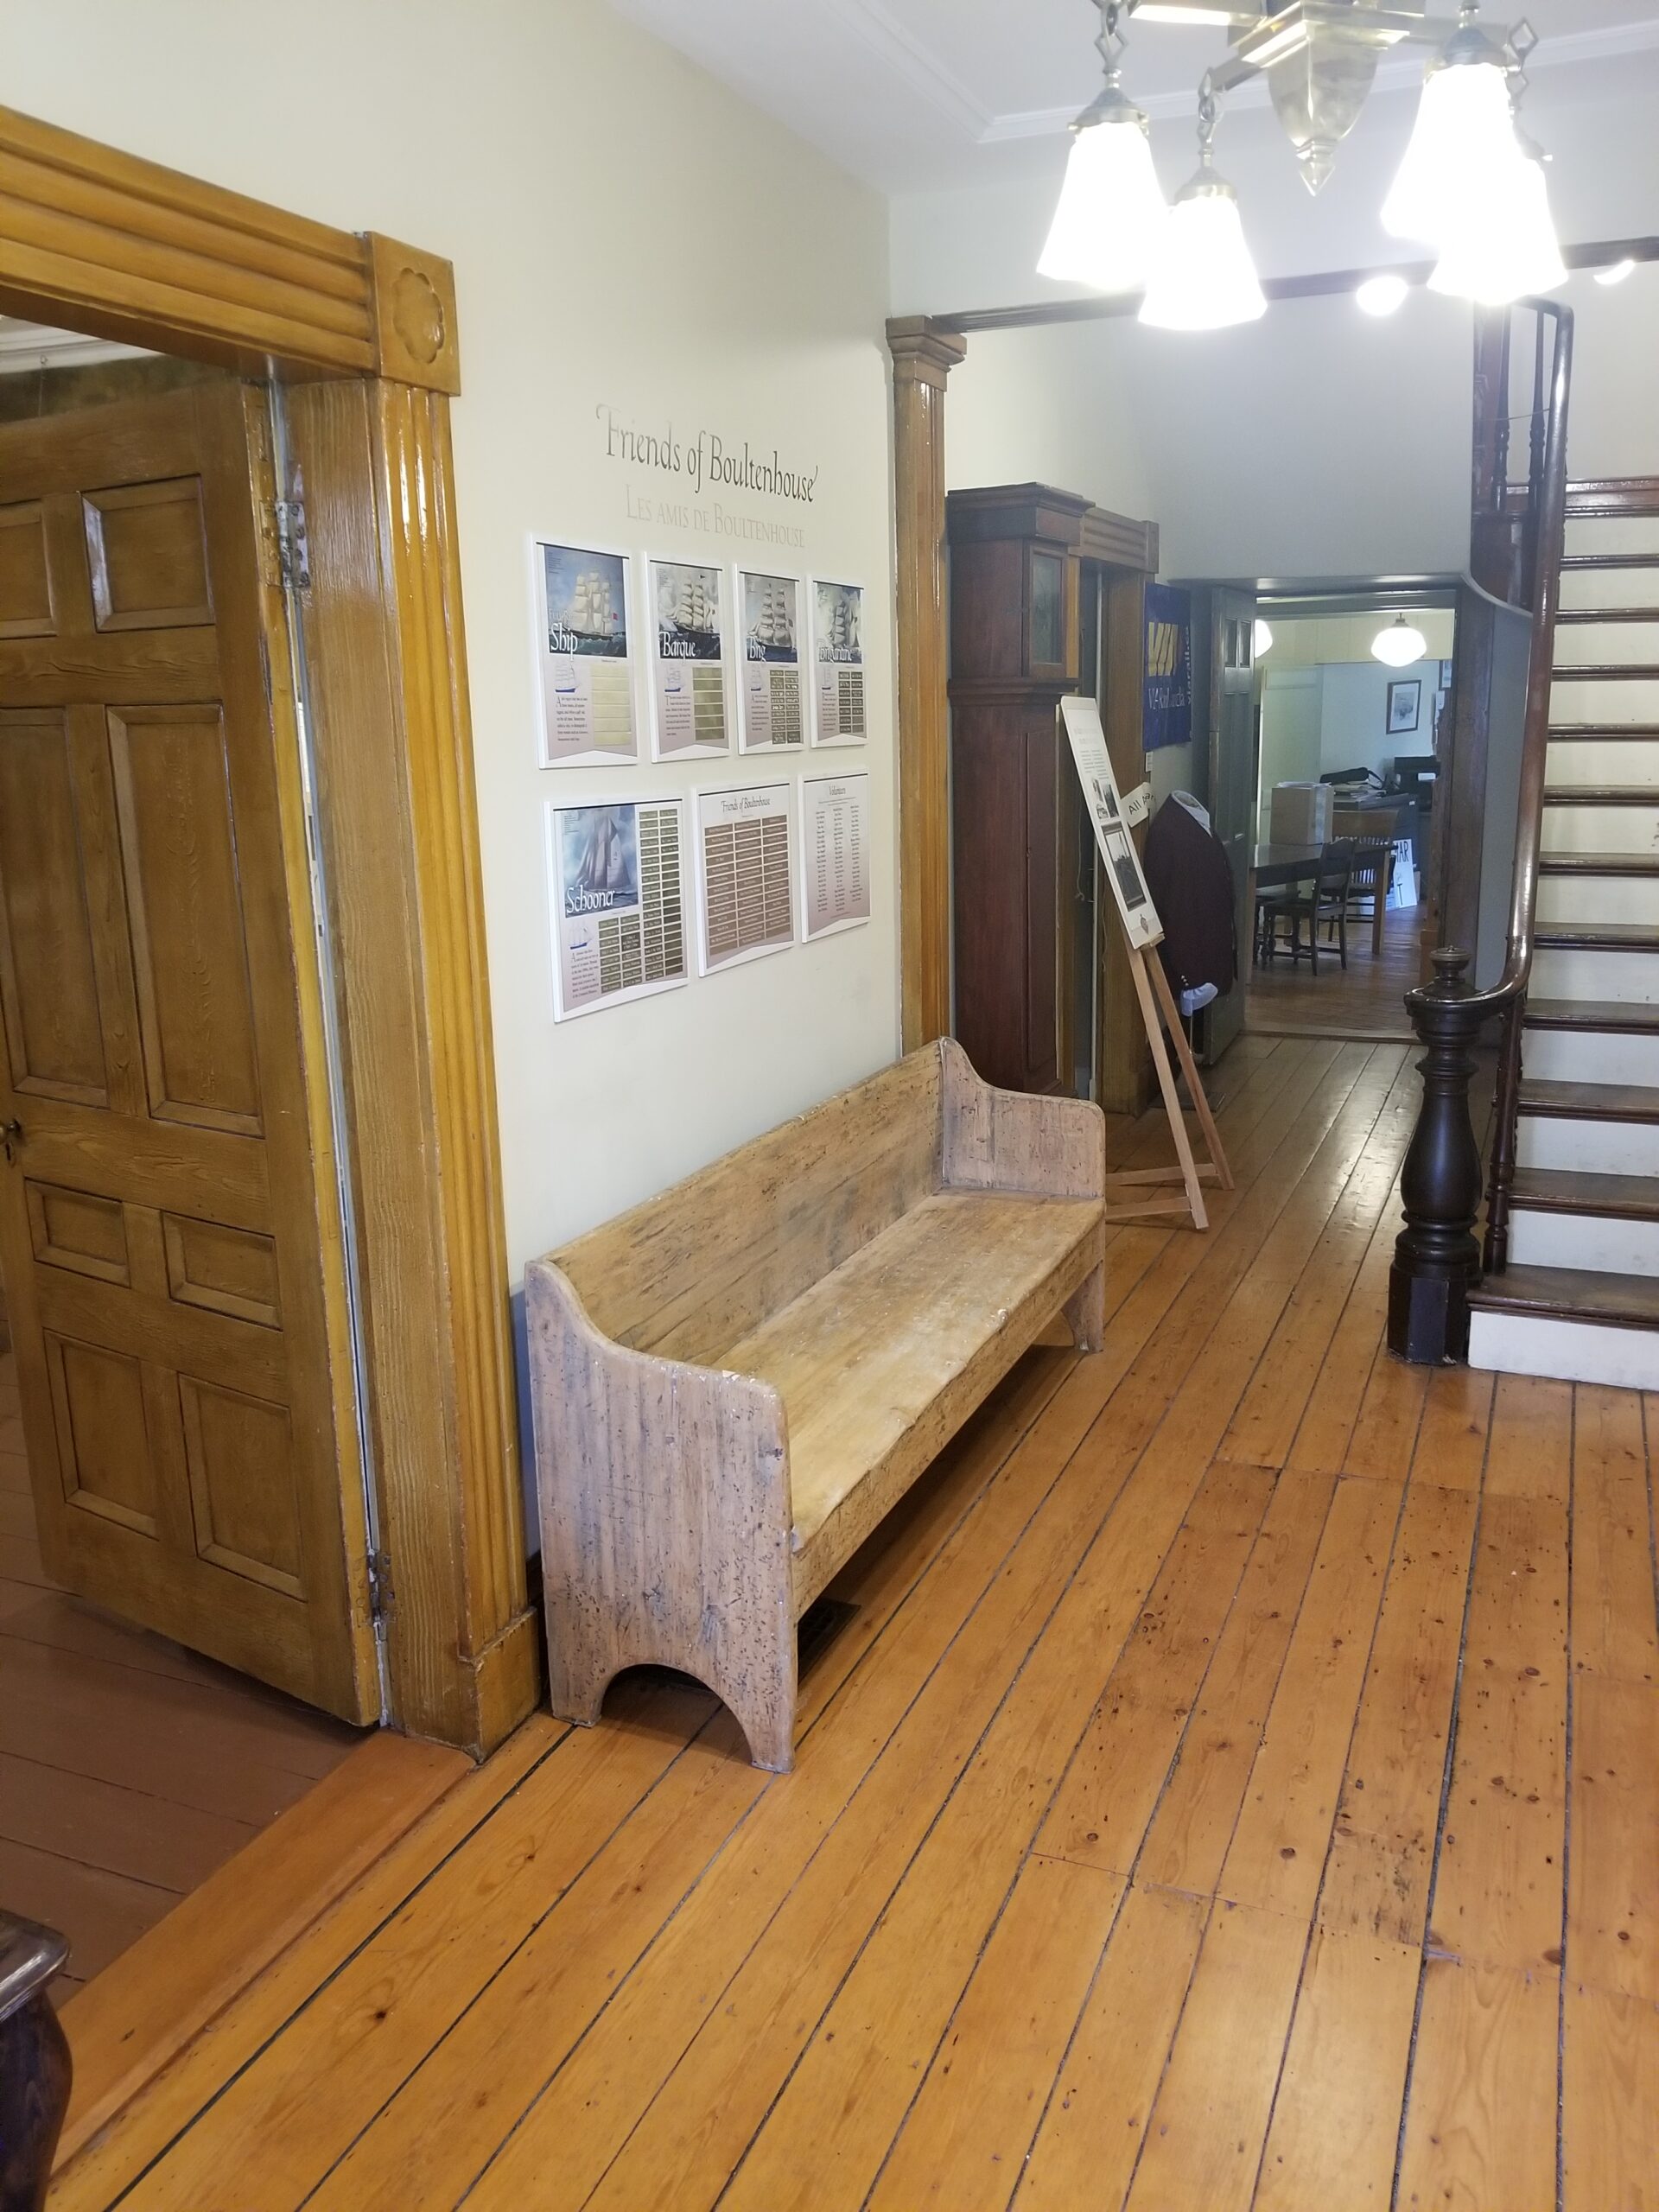 The front hall of the Boultenhouse Heritage Centre.